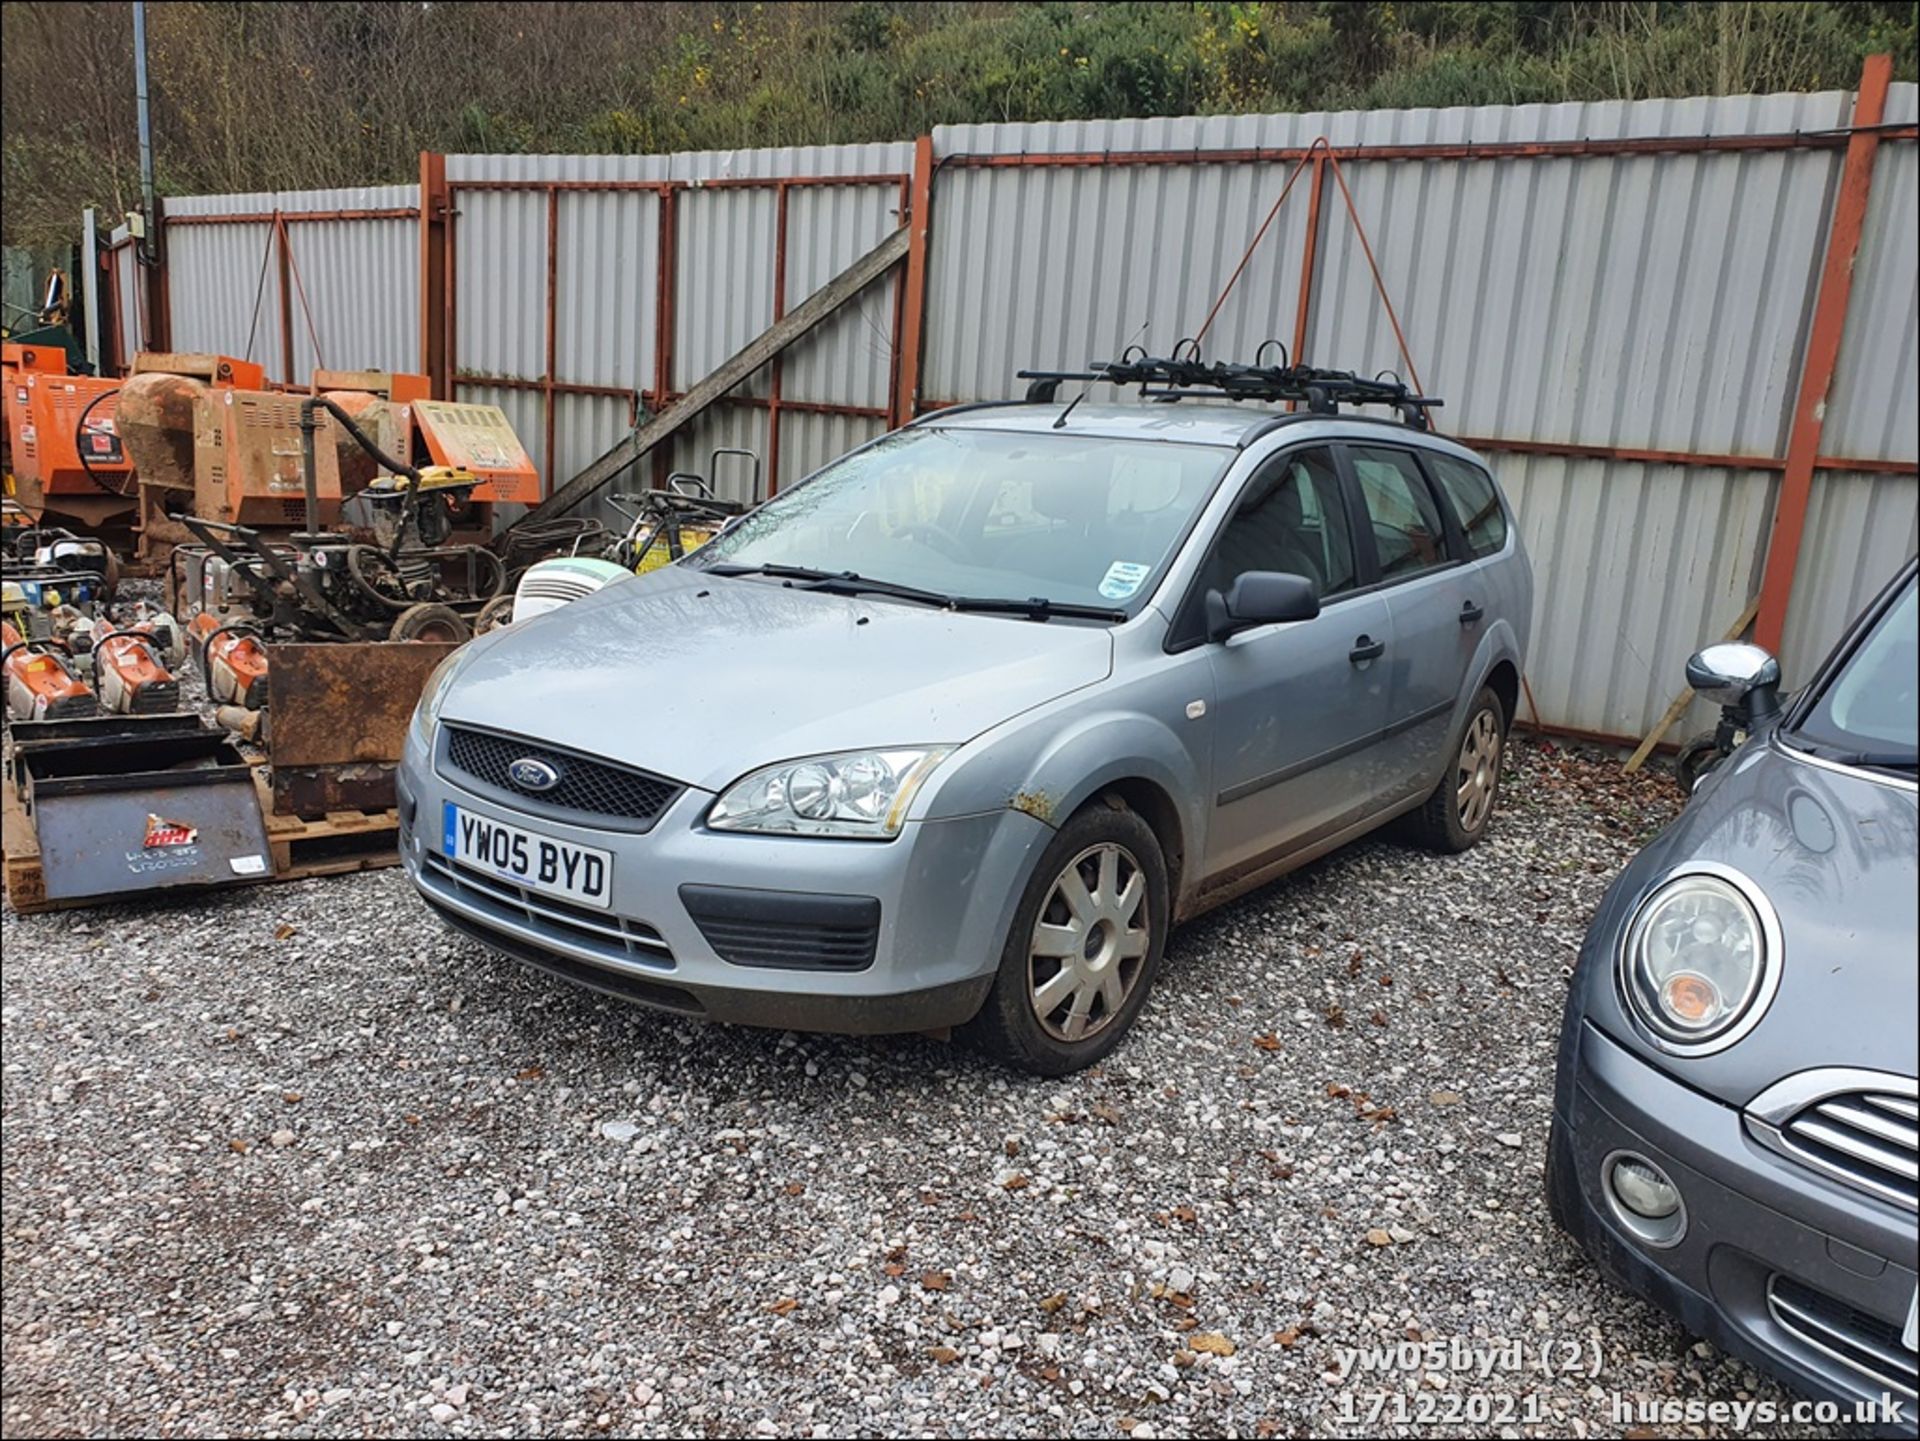 05/05 FORD FOCUS LX T - 1596cc 5dr Estate (Silver, 99k) - Image 2 of 23